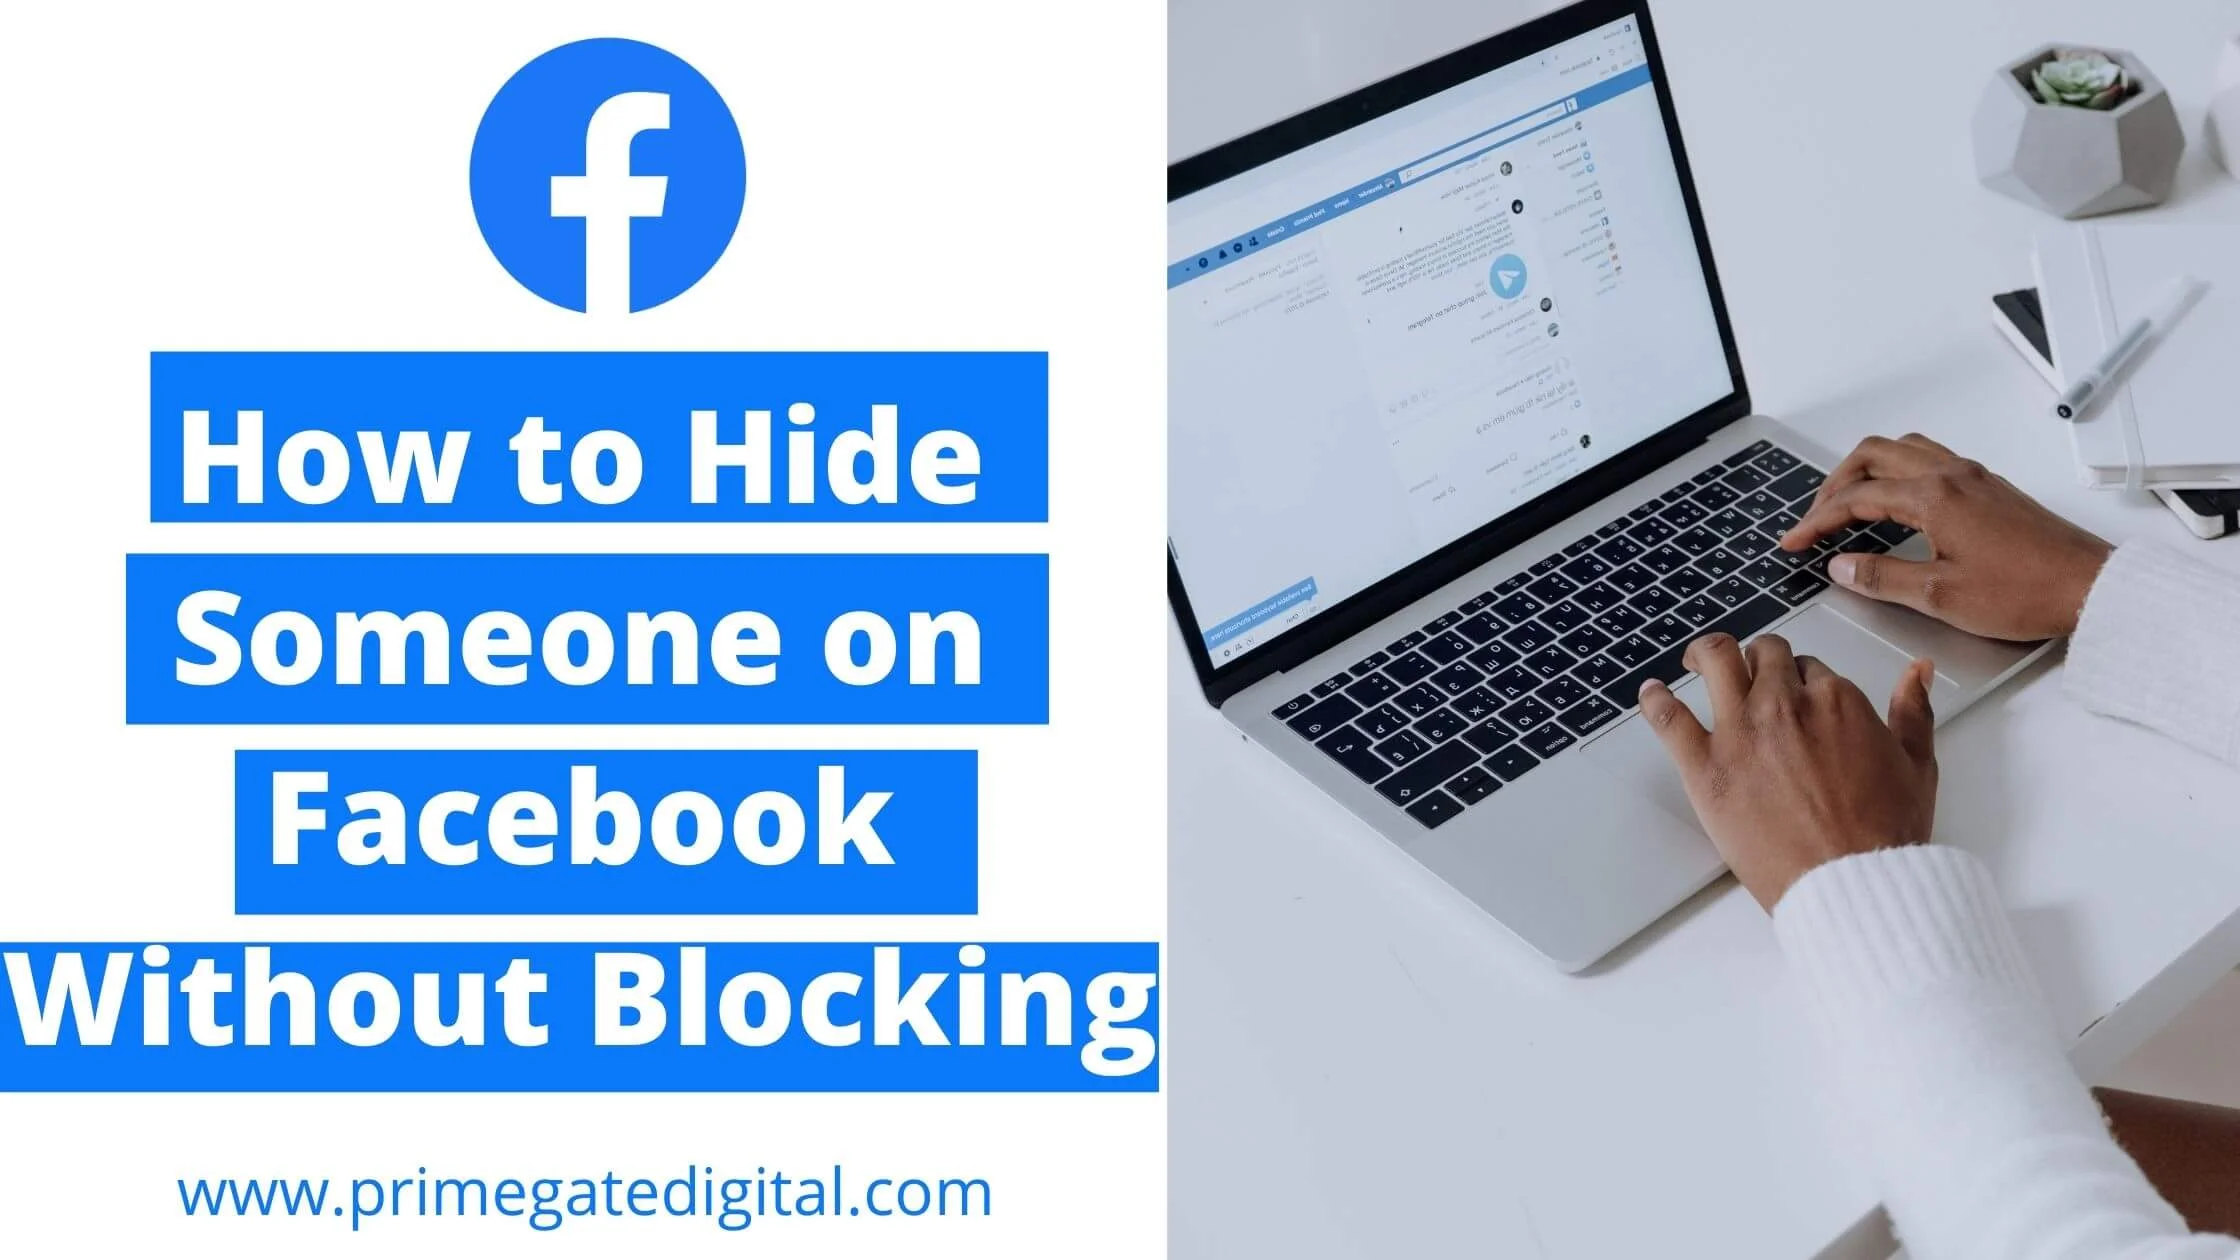 How to Hide Someone on Facebook Without Blocking